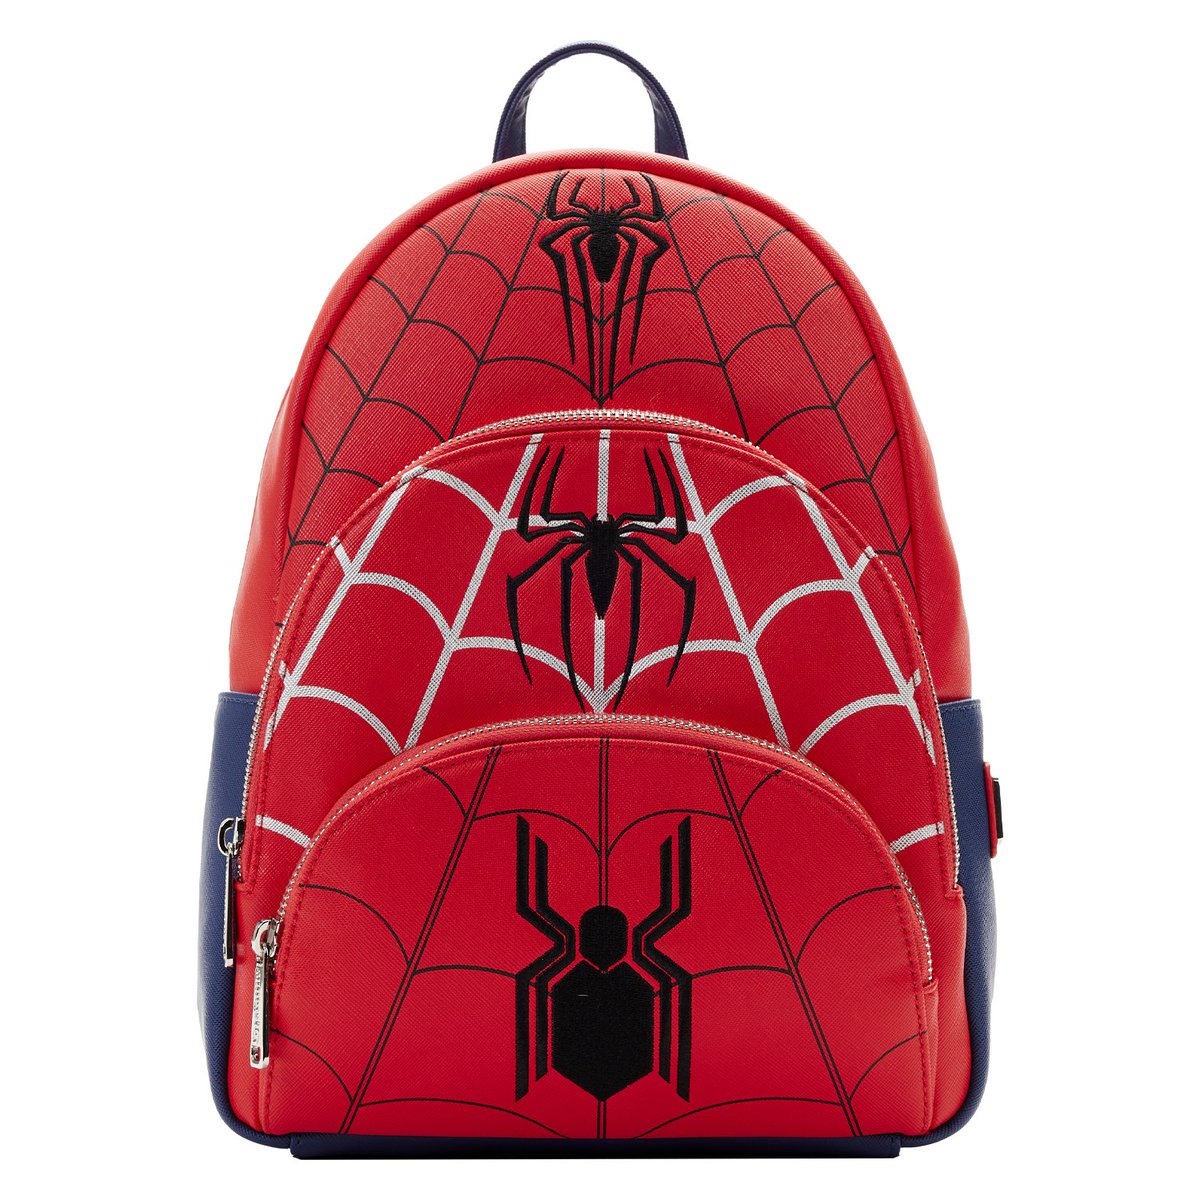 RT @SpiderMan3news: Spider-Man no way home Loungefly backpack https://t.co/gTpKqfSPqx